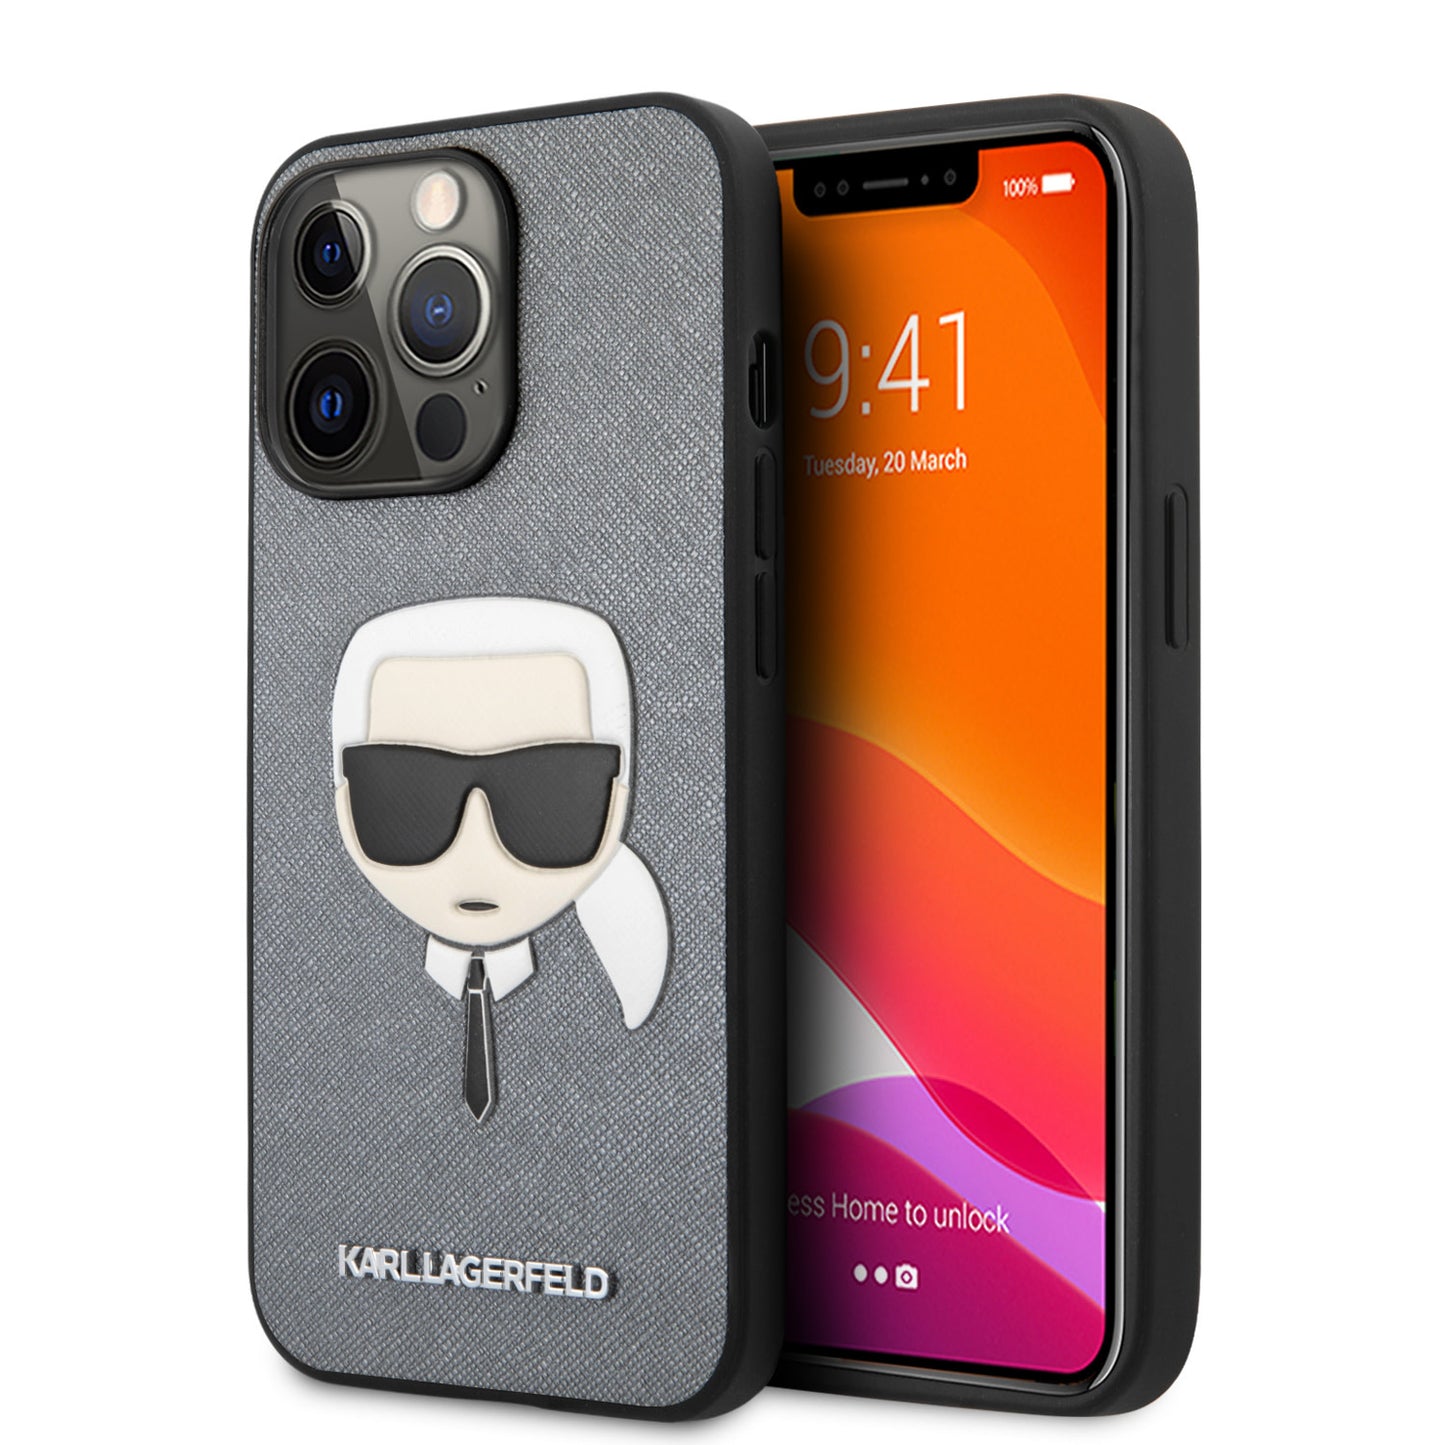 Karl Lagerfeld iPhone 13 PRO Backcover - Karl's head - Zilver